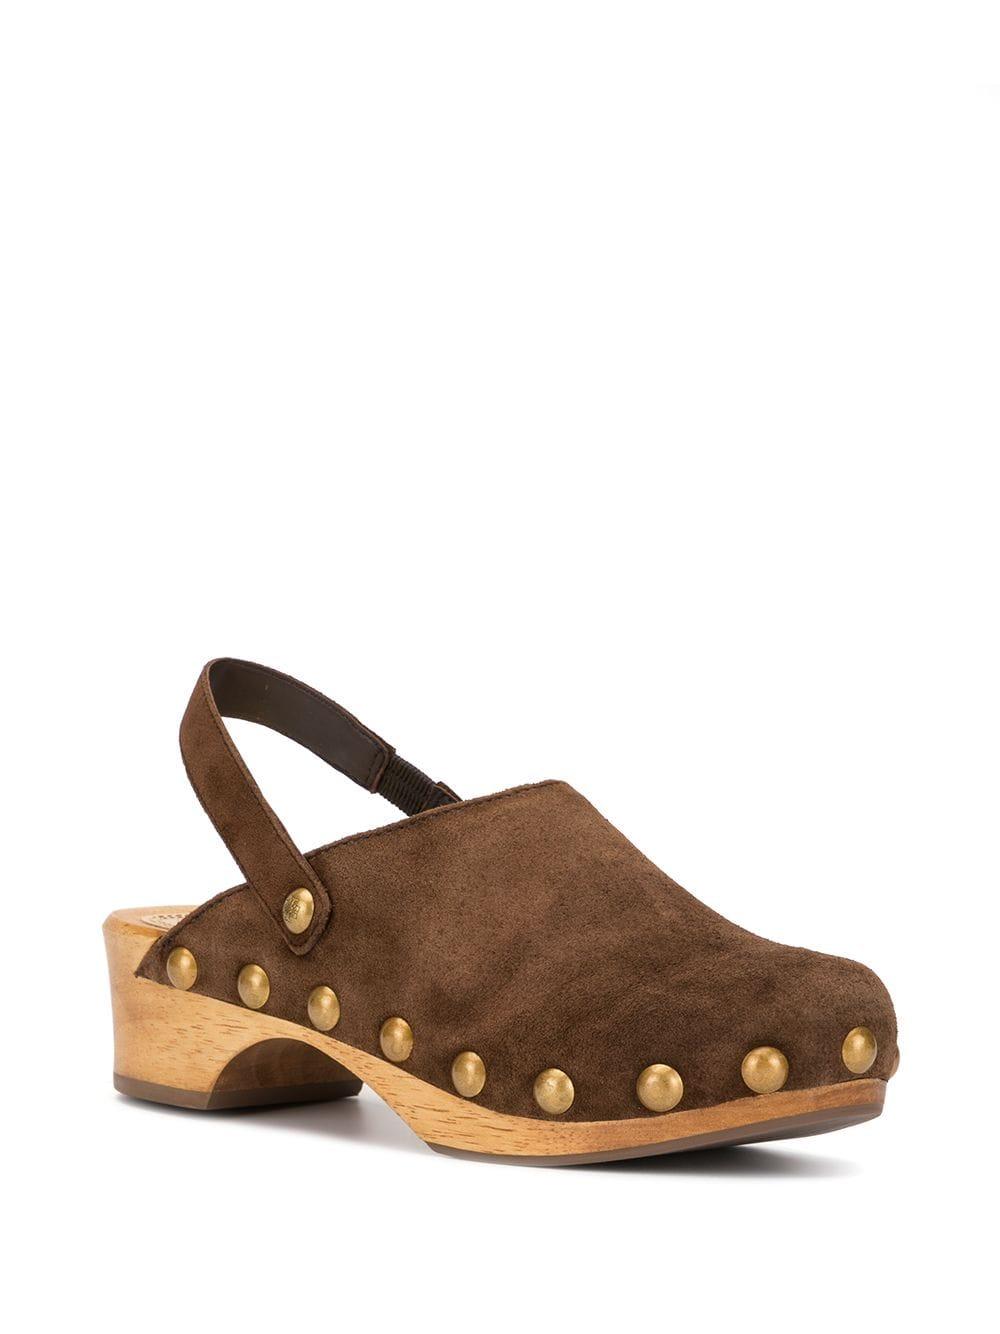 Tory Burch Blythe Studded Clogs in Brown | Lyst